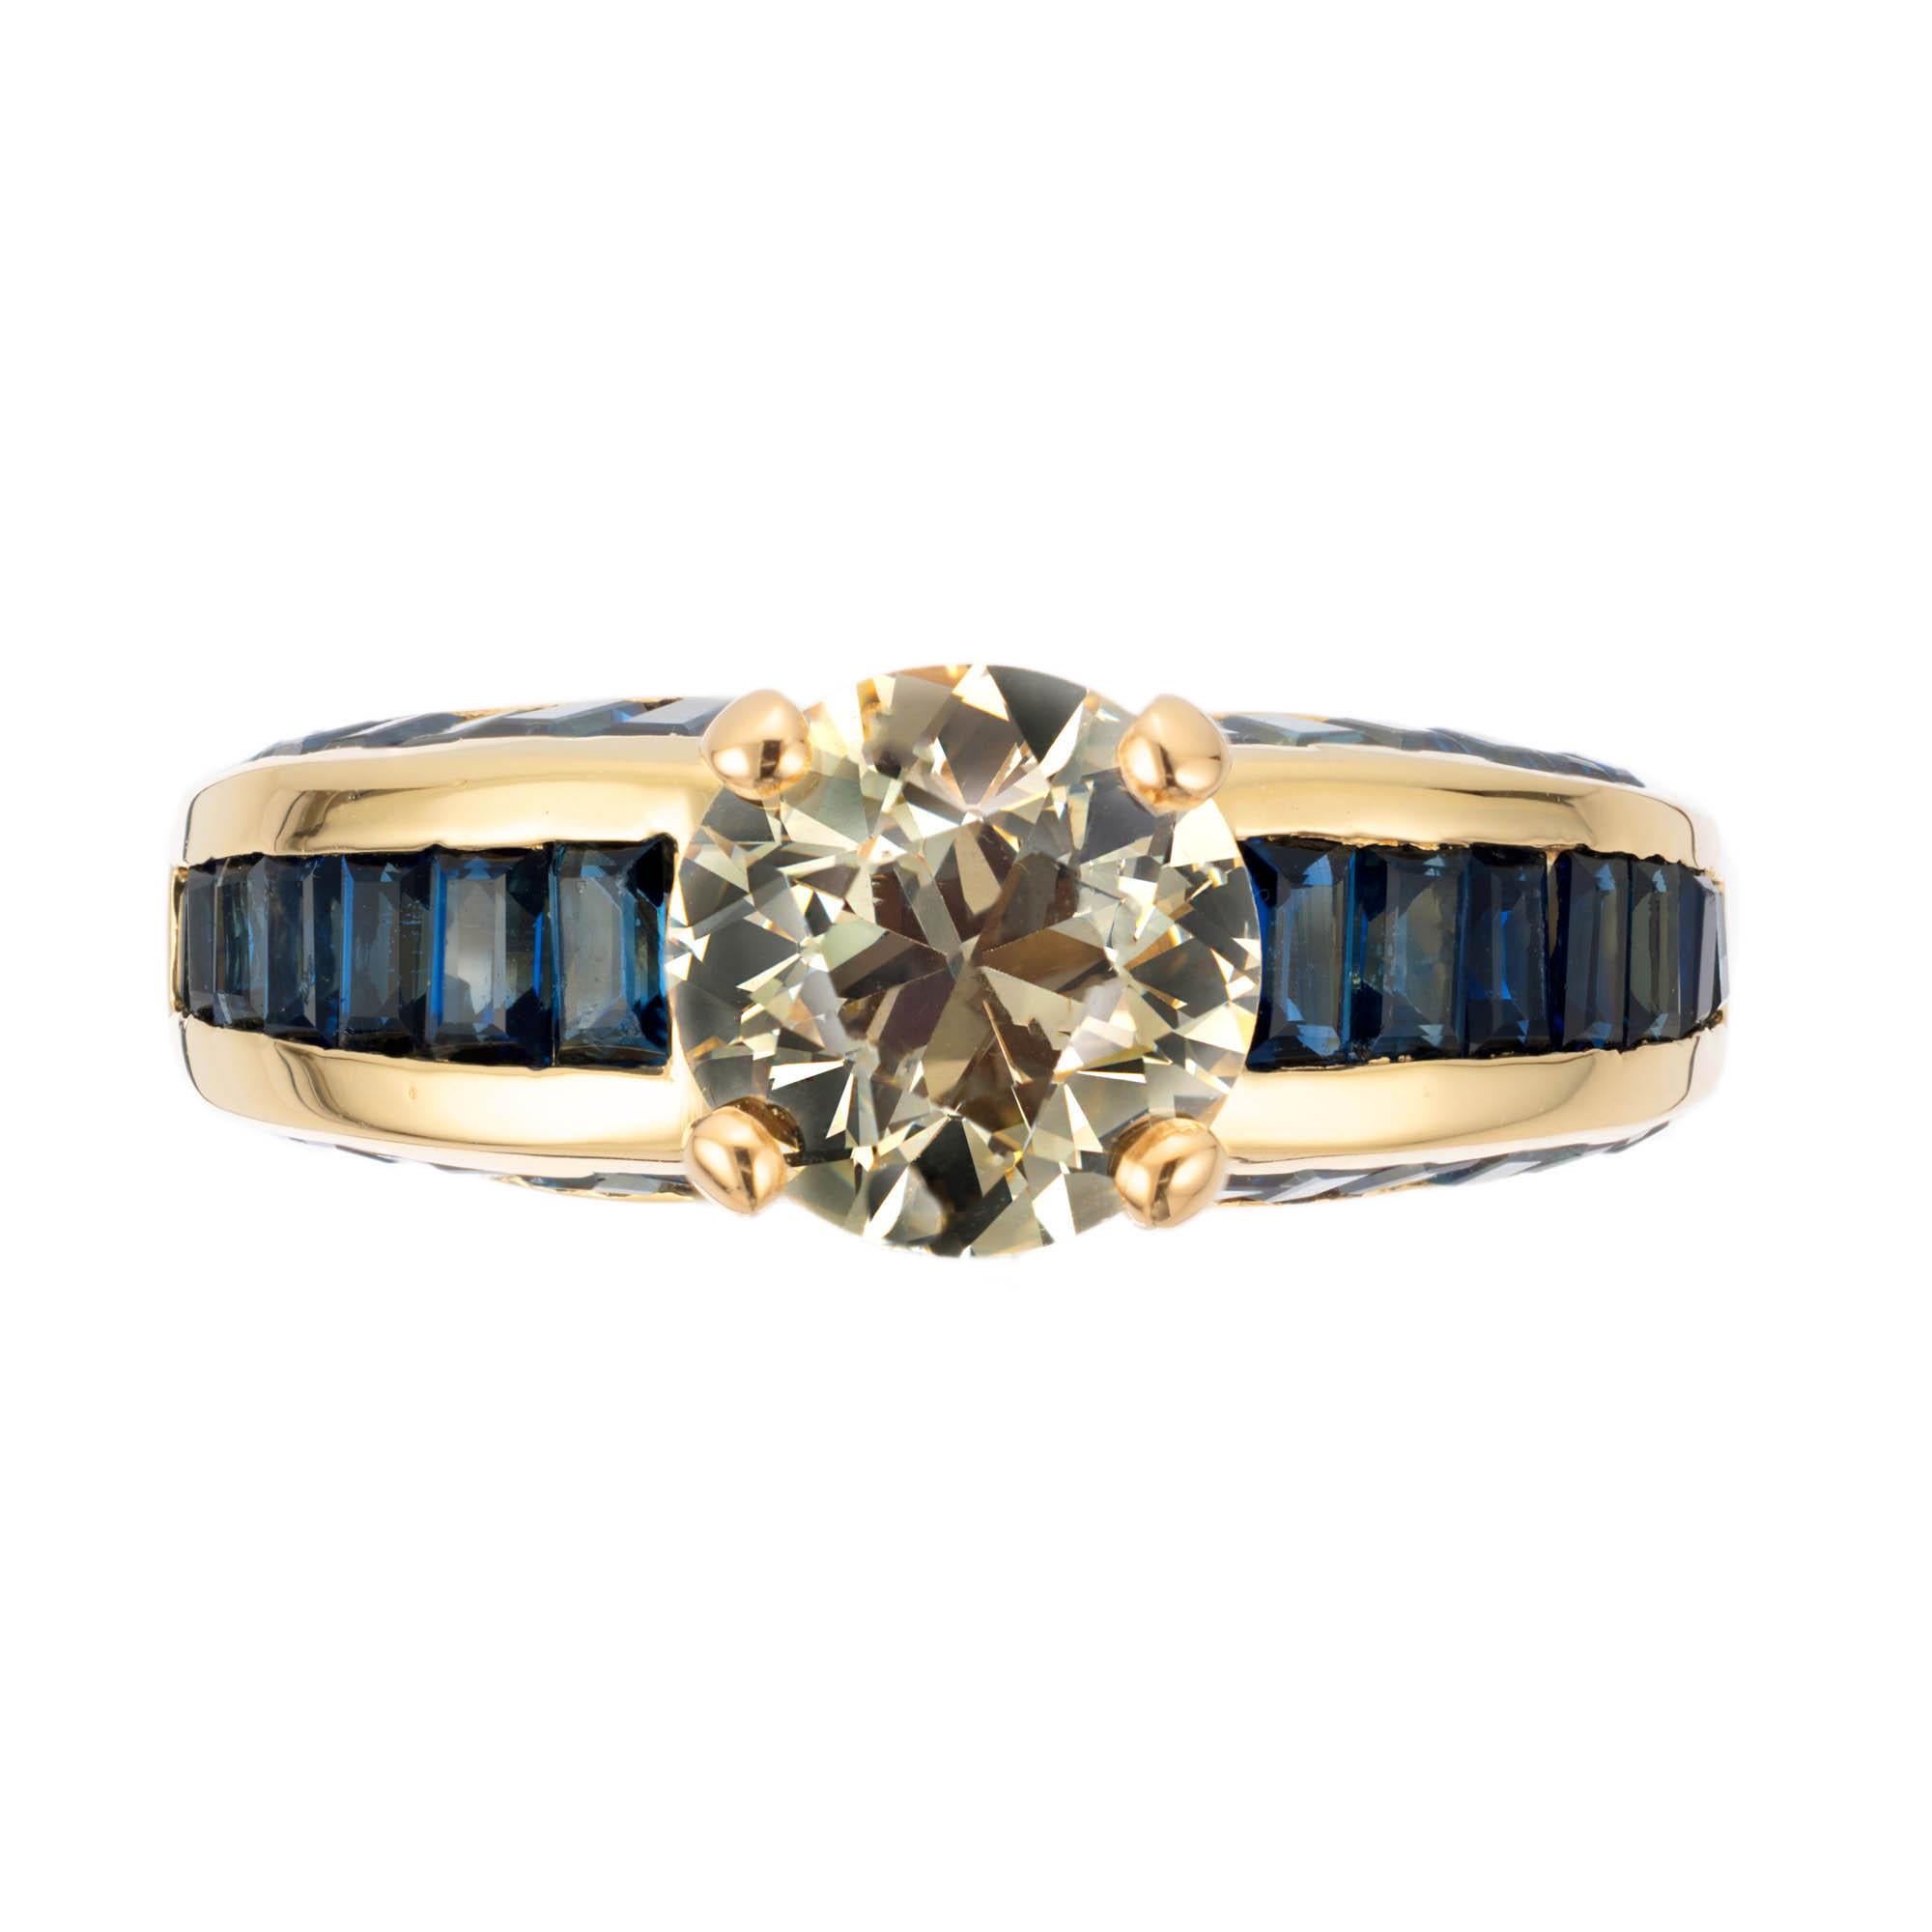 Old European brilliant cut diamond and sapphire engagement ring. Natural fancy light golden yellow GIA certified accented with 42 step cut graduated sapphires in a 18k yellow gold setting. 

1 old European cut natural fancy light brown yellow